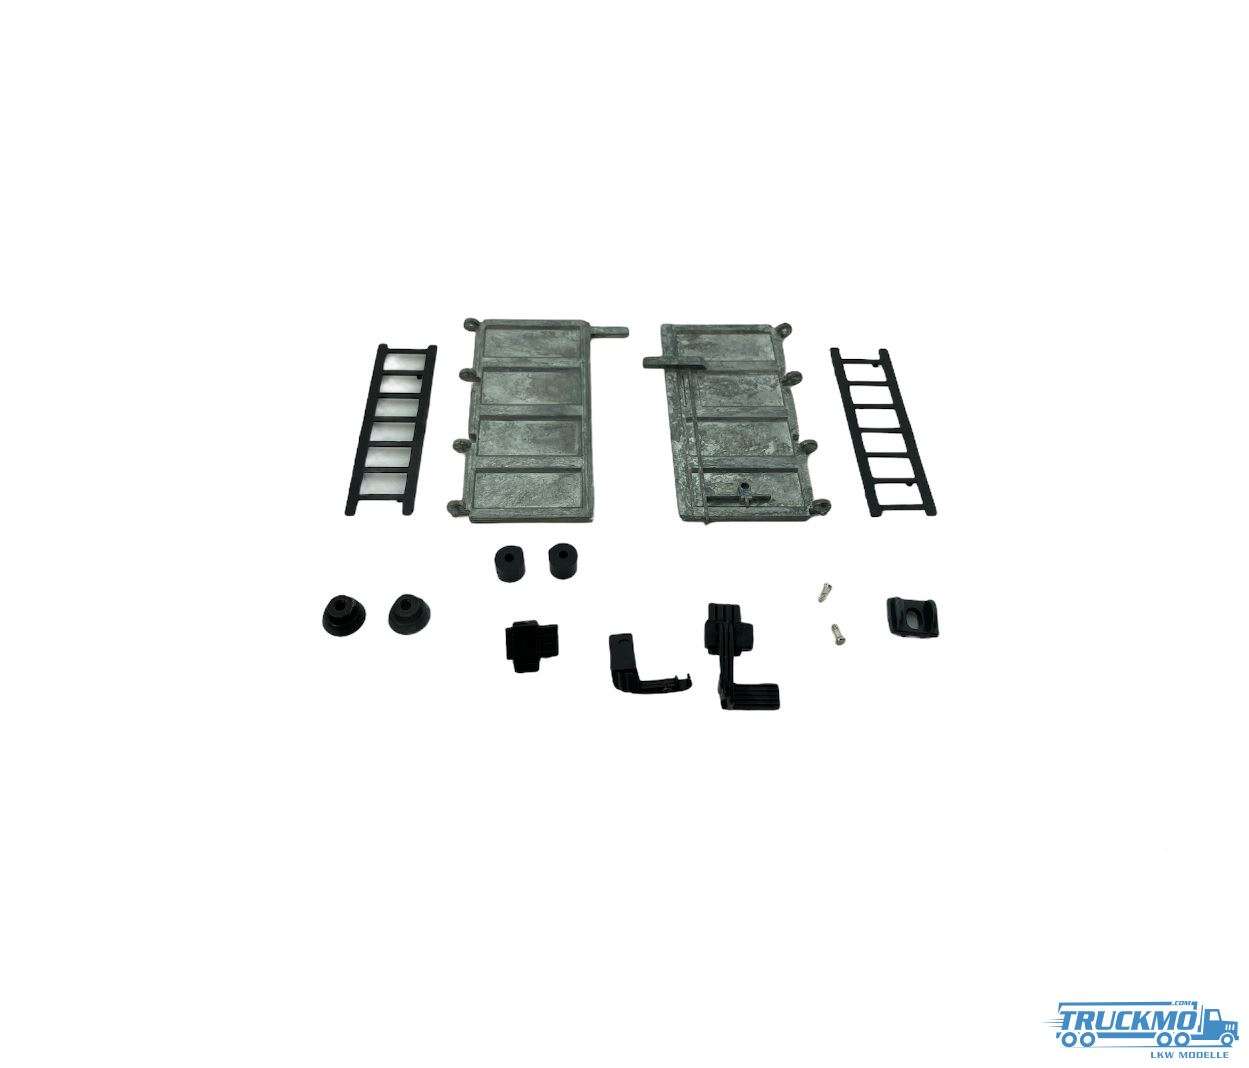 Tekno Parts Hooklift System + 40m3 Müllcontainer Teile 77532